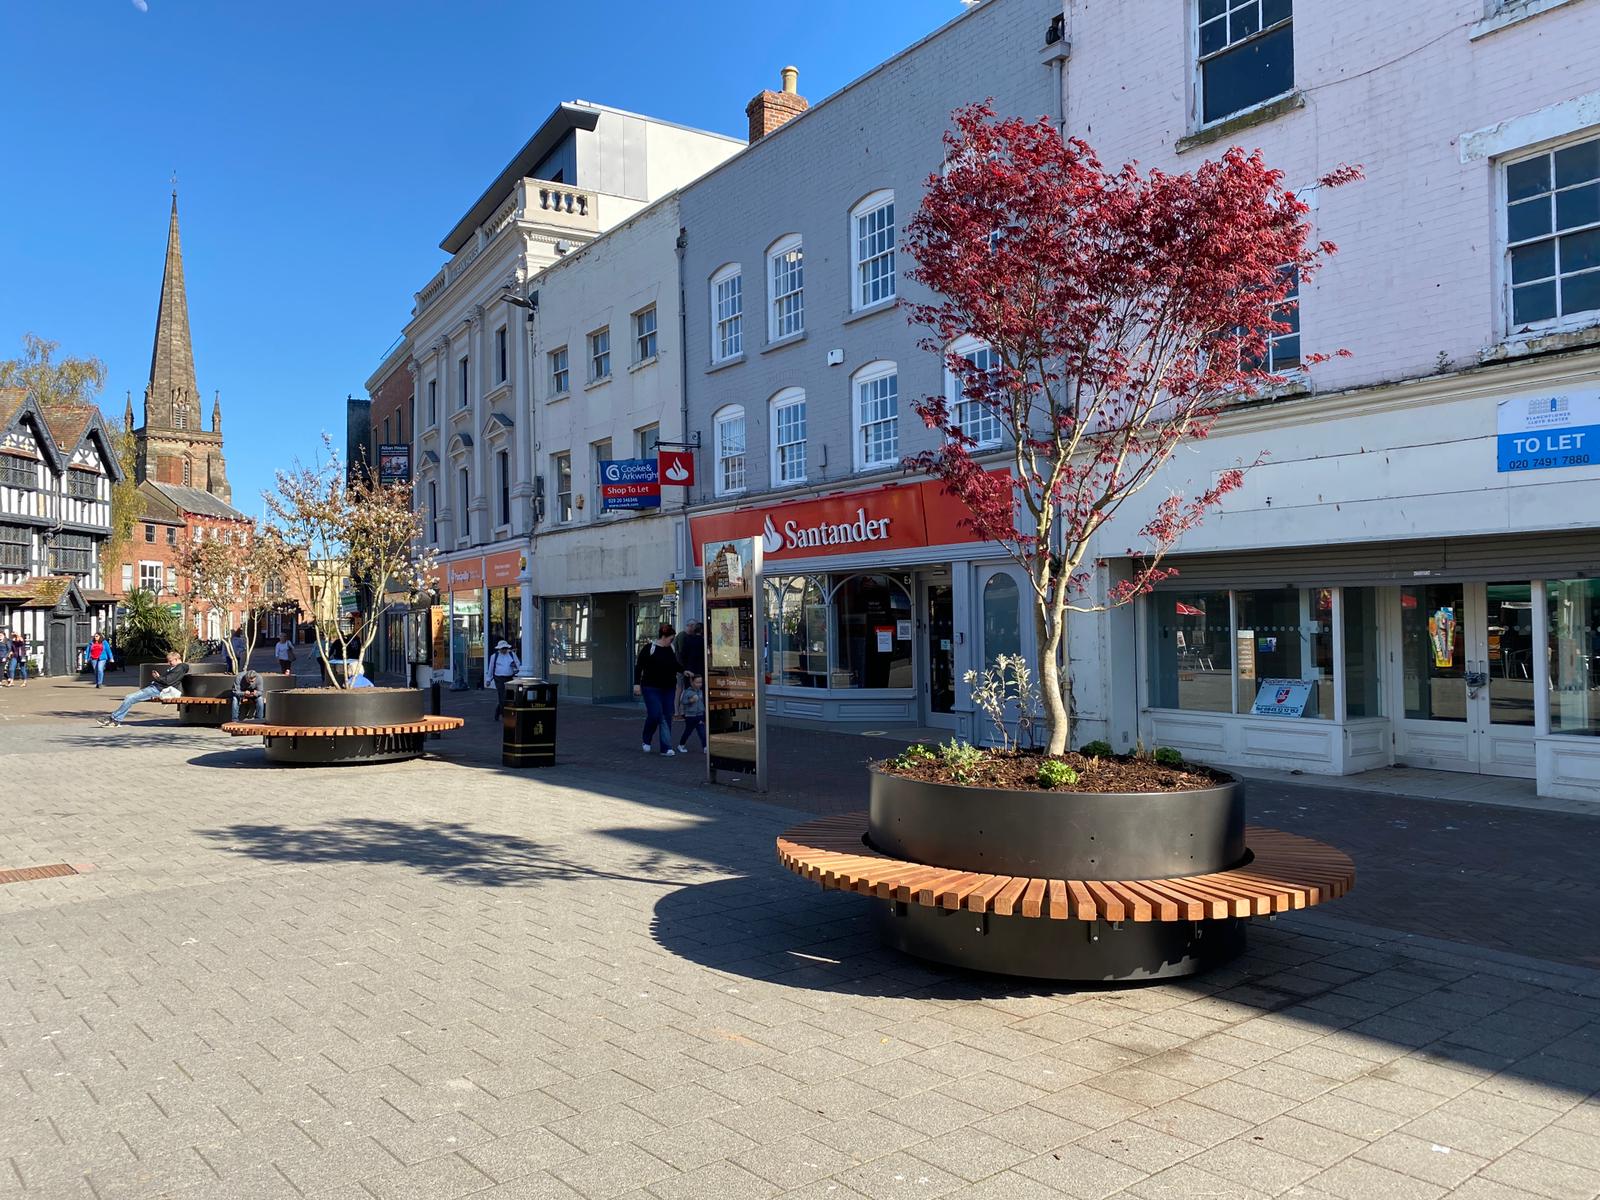 NEWS | Hereford’s new trees look amazing and this is just the start